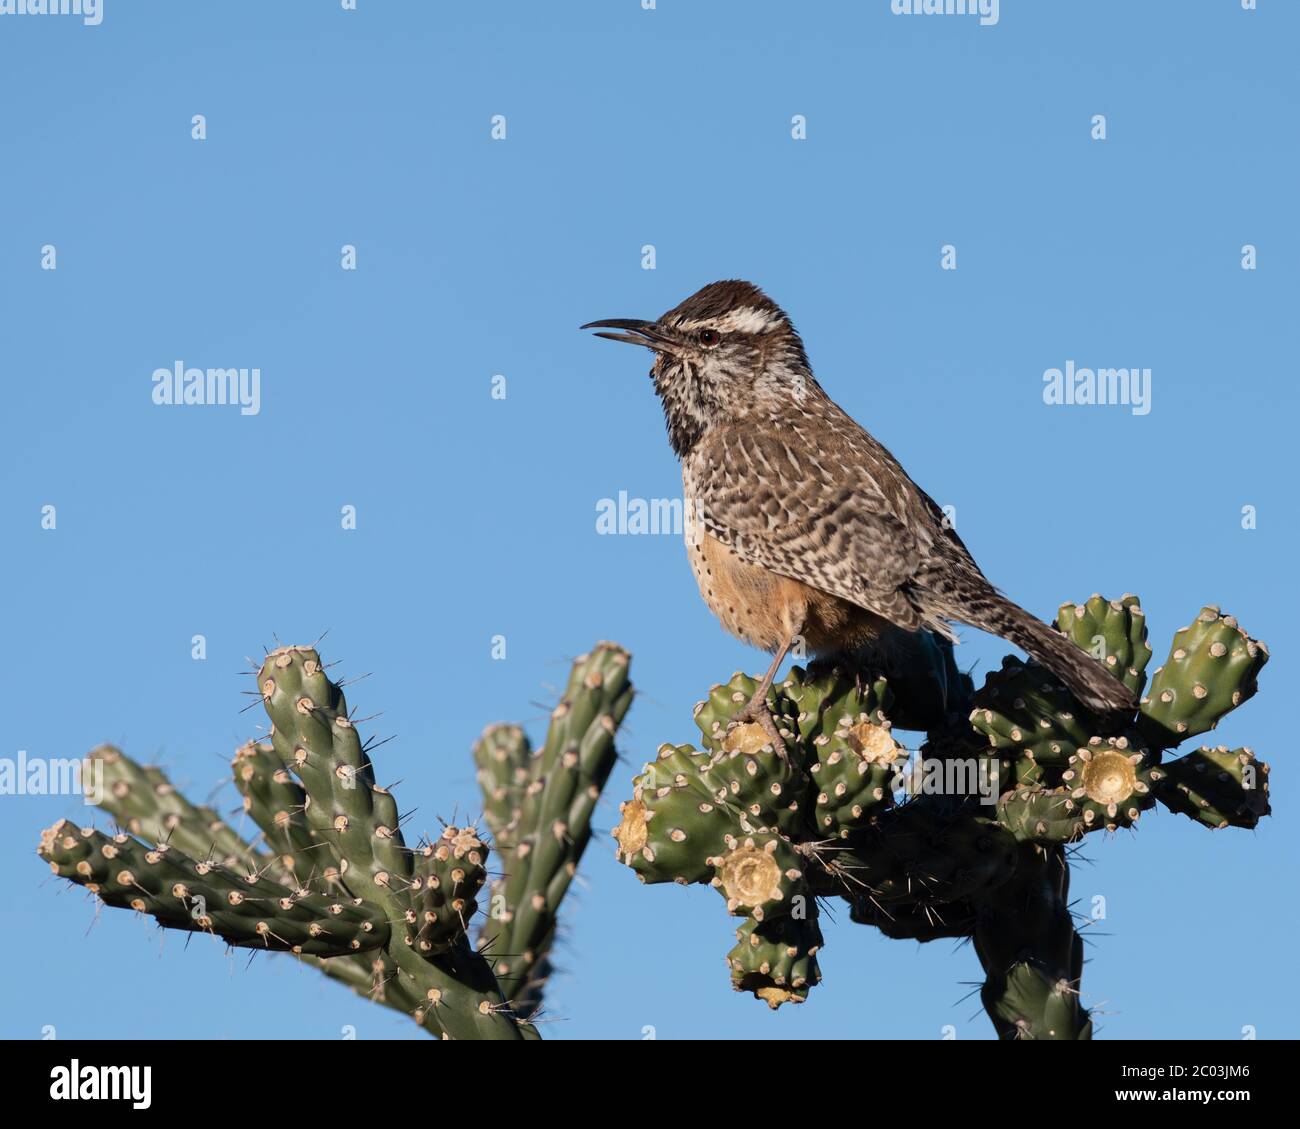 Male Cactus wren perched on a Cylindropuntia fulgida, jumping cholla, hanging chain cholla, Cholla Cactus in Arizona taking a break from nest building Stock Photo